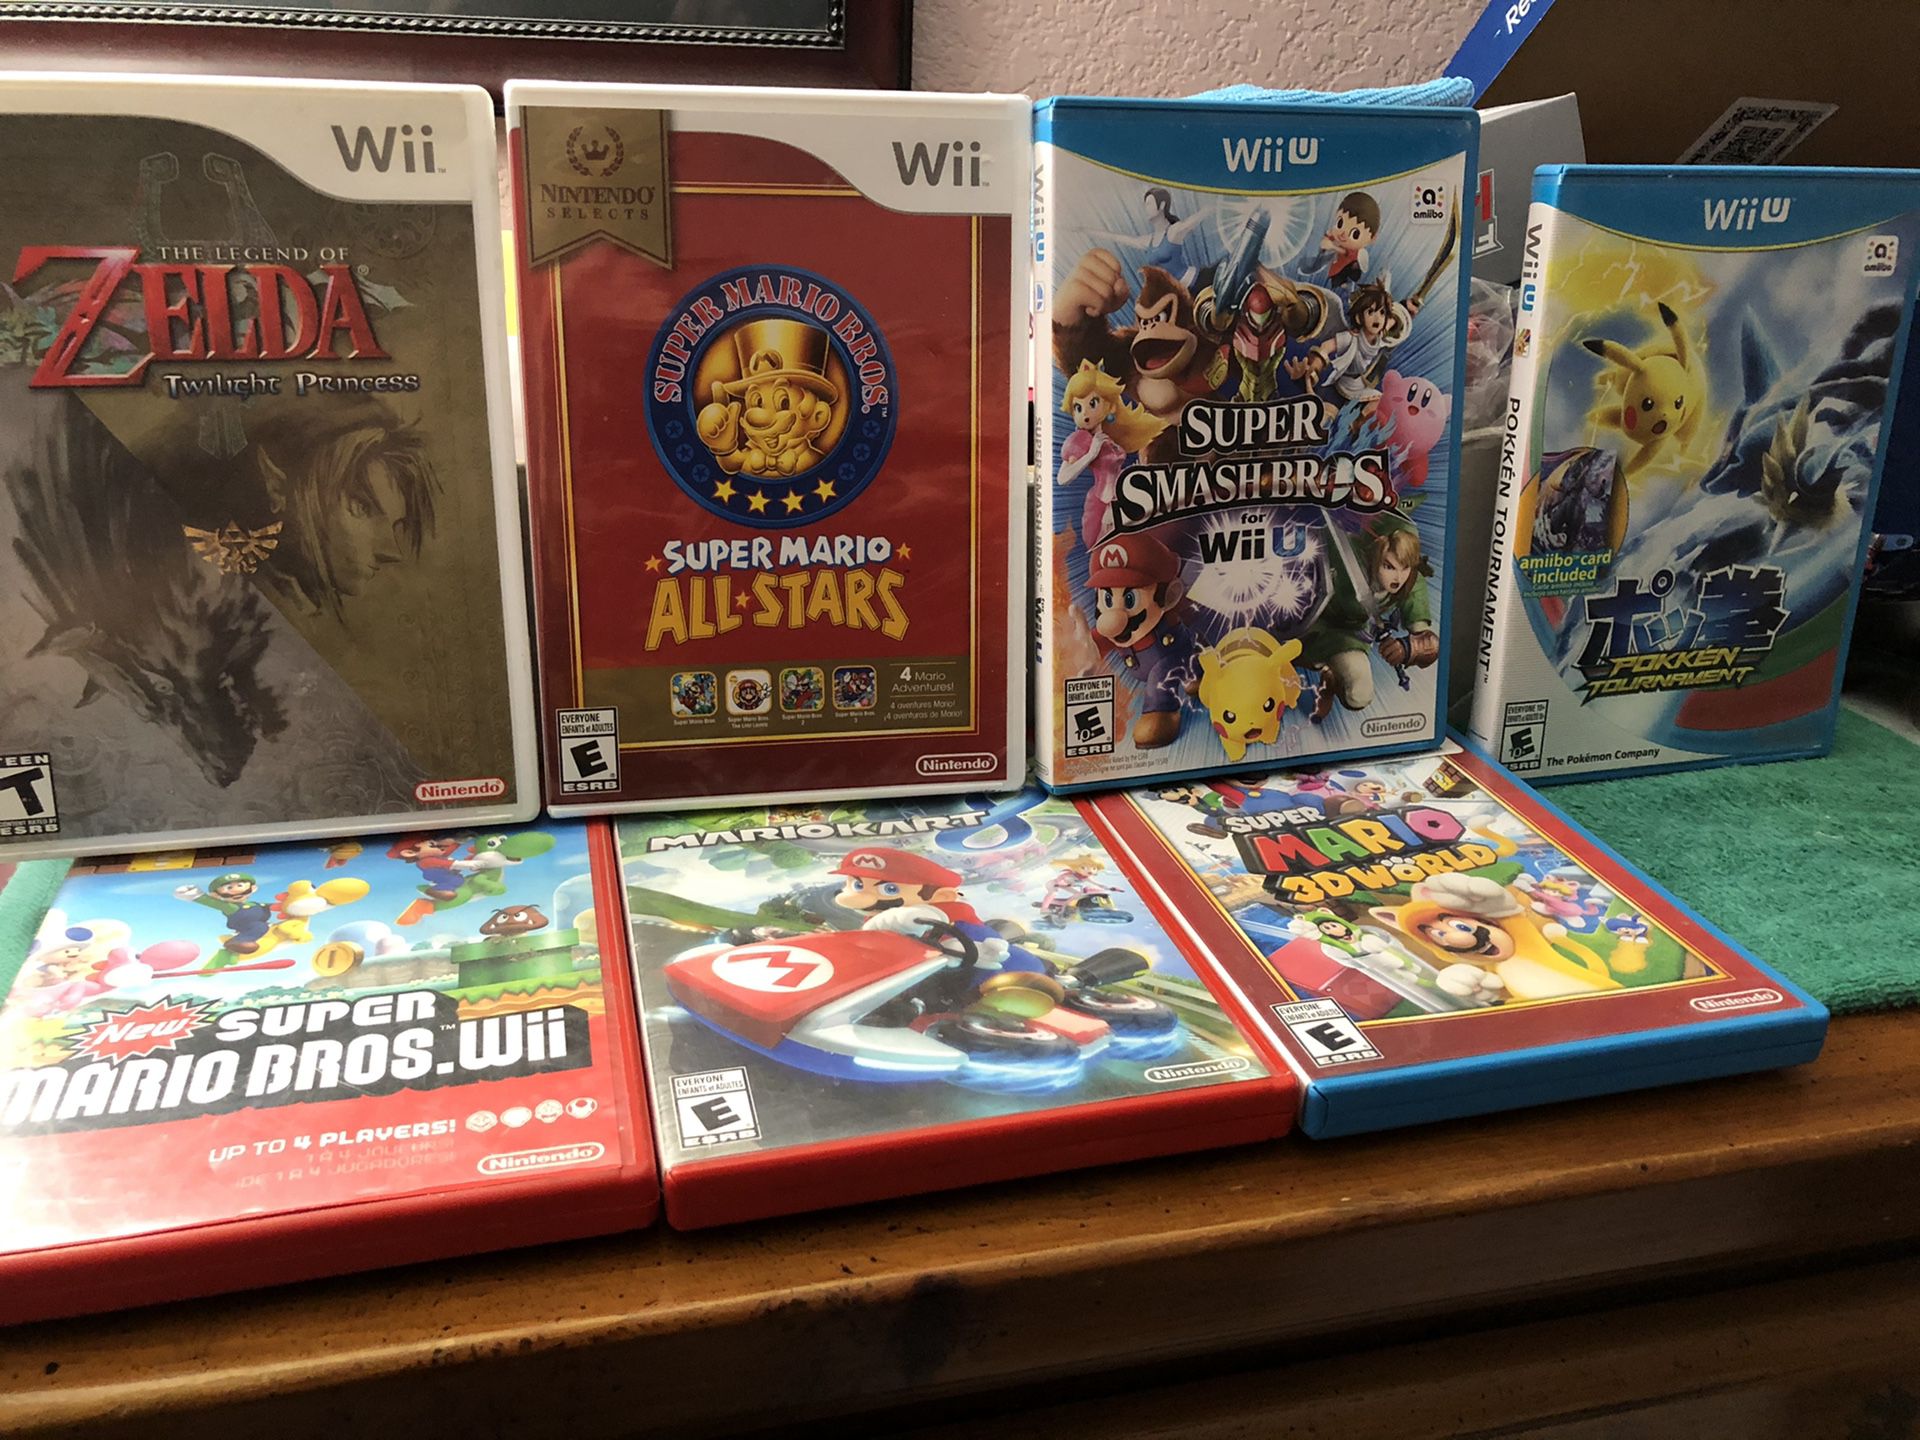 Selling Wii U, Wii & games for both systems $125